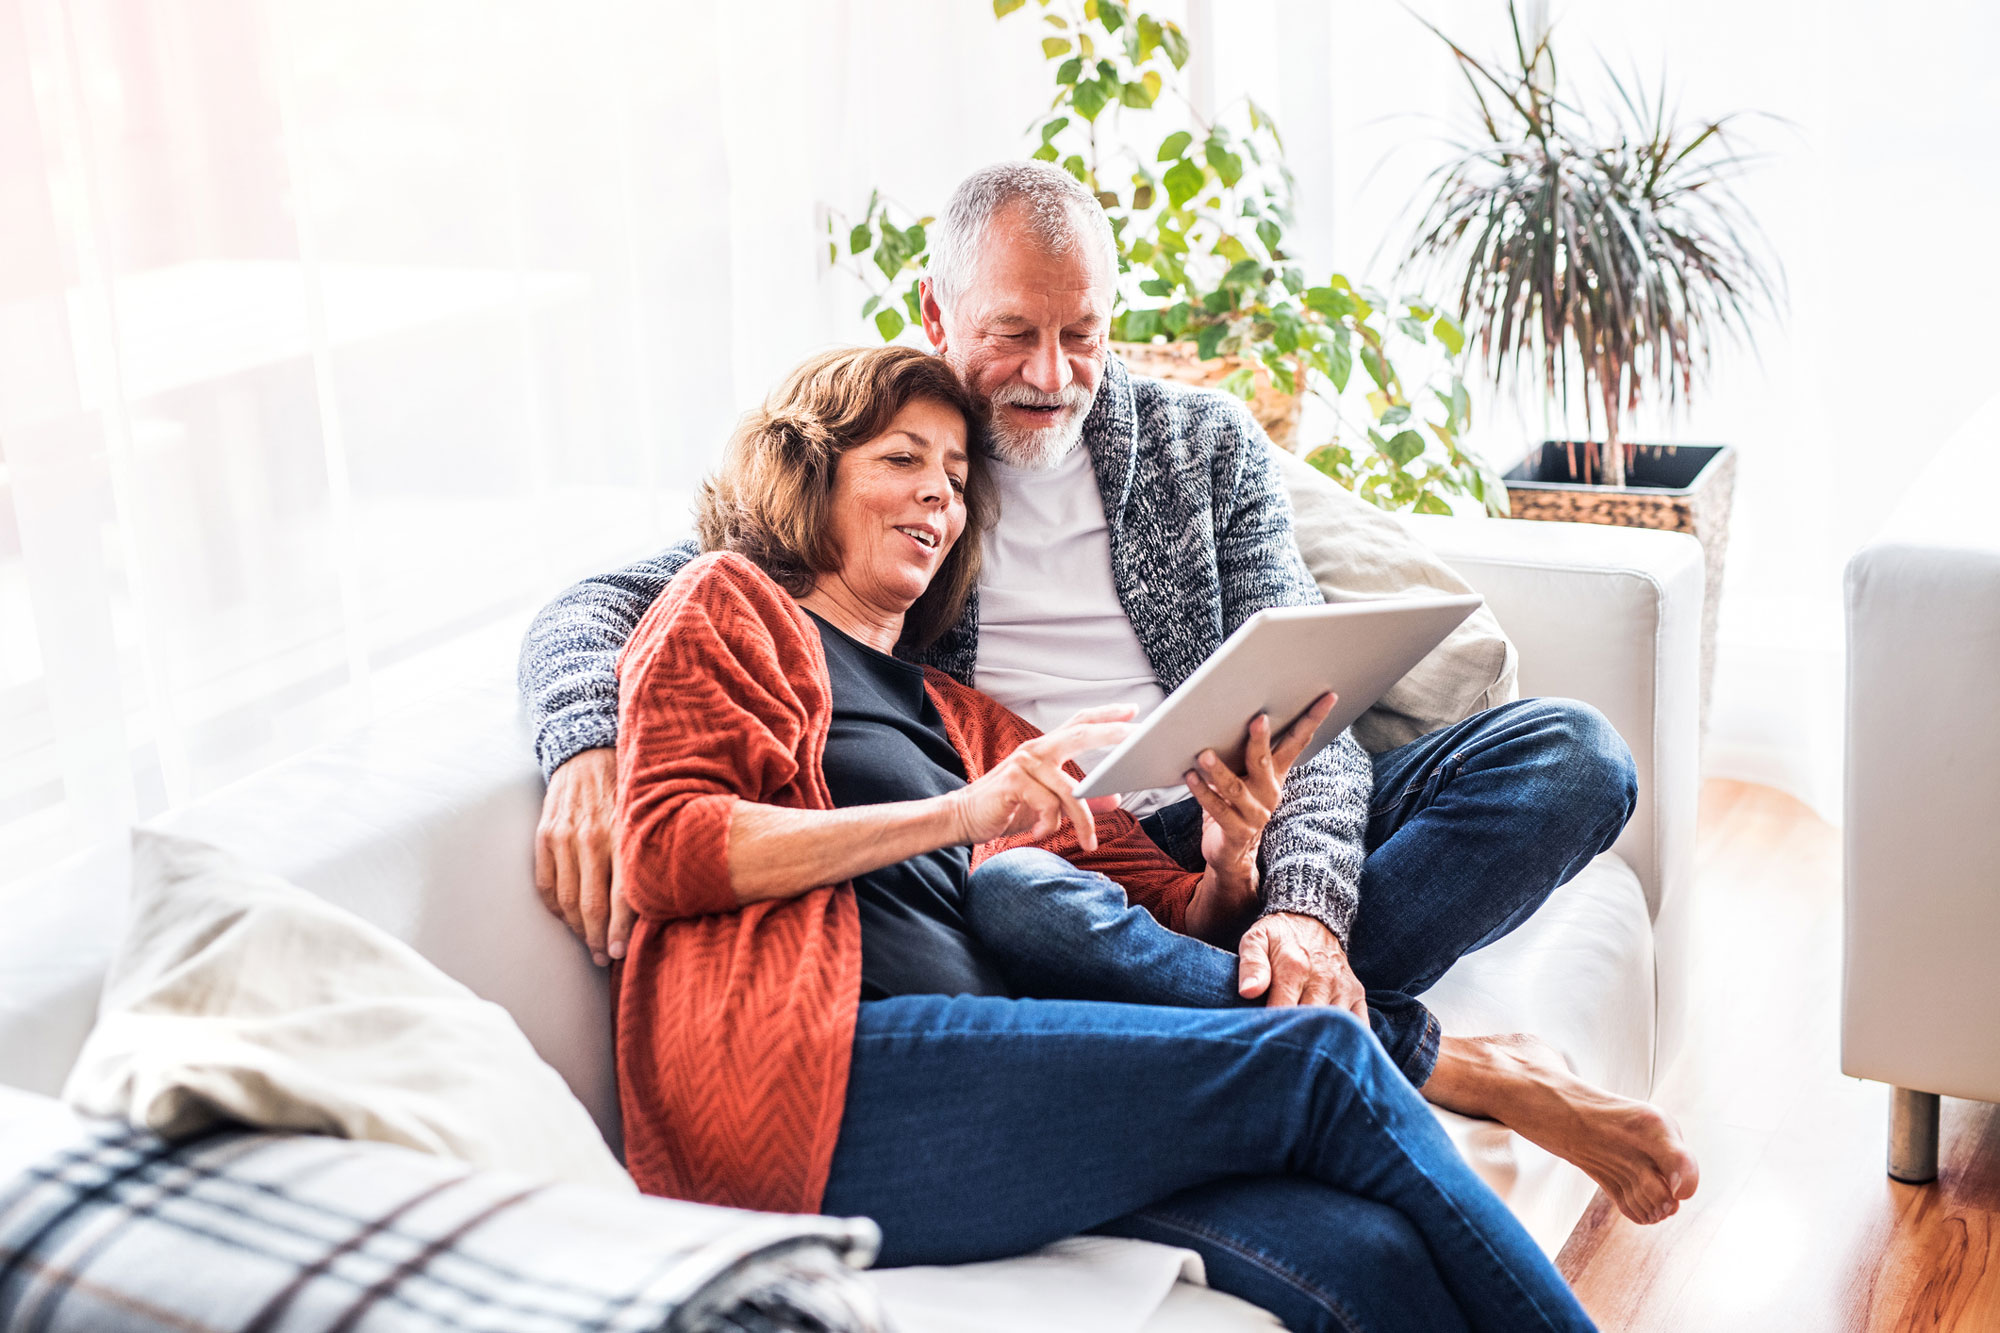 Elder Law Concept - Senior couple with tablet relaxing at home